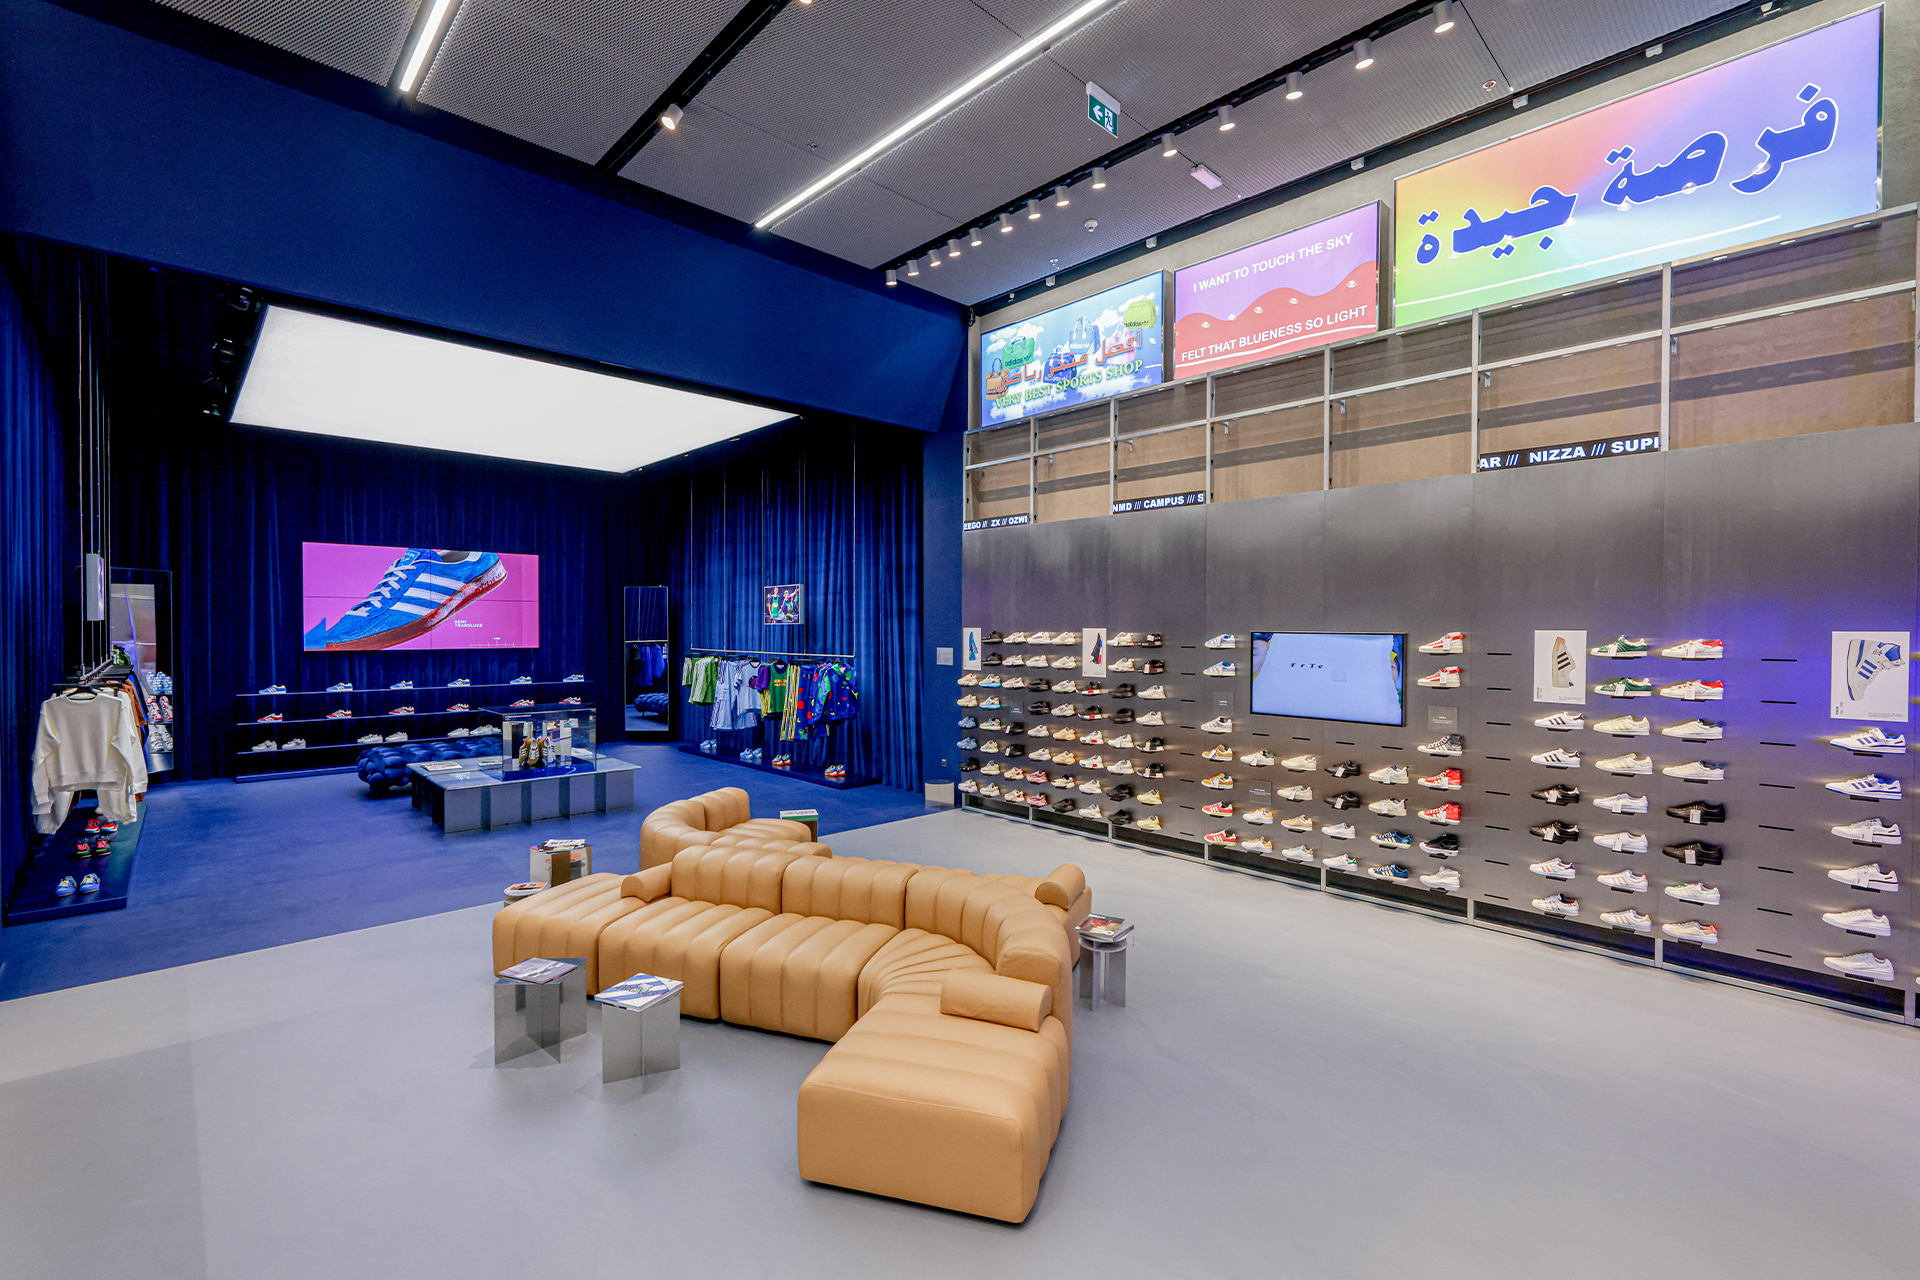 Christopher Joshua Benton Presents a Lightbox Installation at the New Adidas Originals Store - GQ Middle East